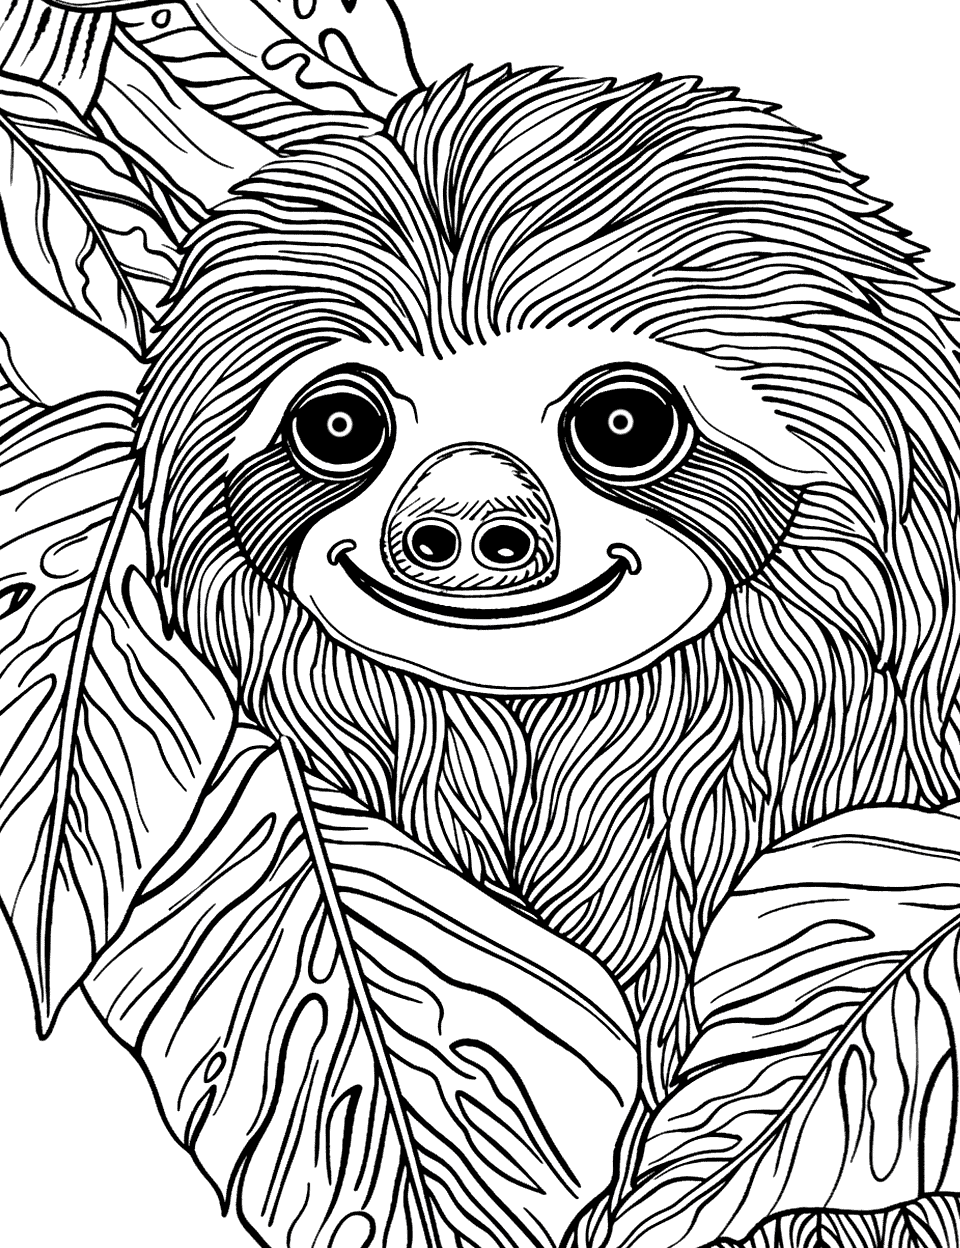 Detailed Sloth Face Close-Up Coloring Page - A close-up view of a sloth’s face, focusing on its detailed features like the eyes, nose, and fur texture.